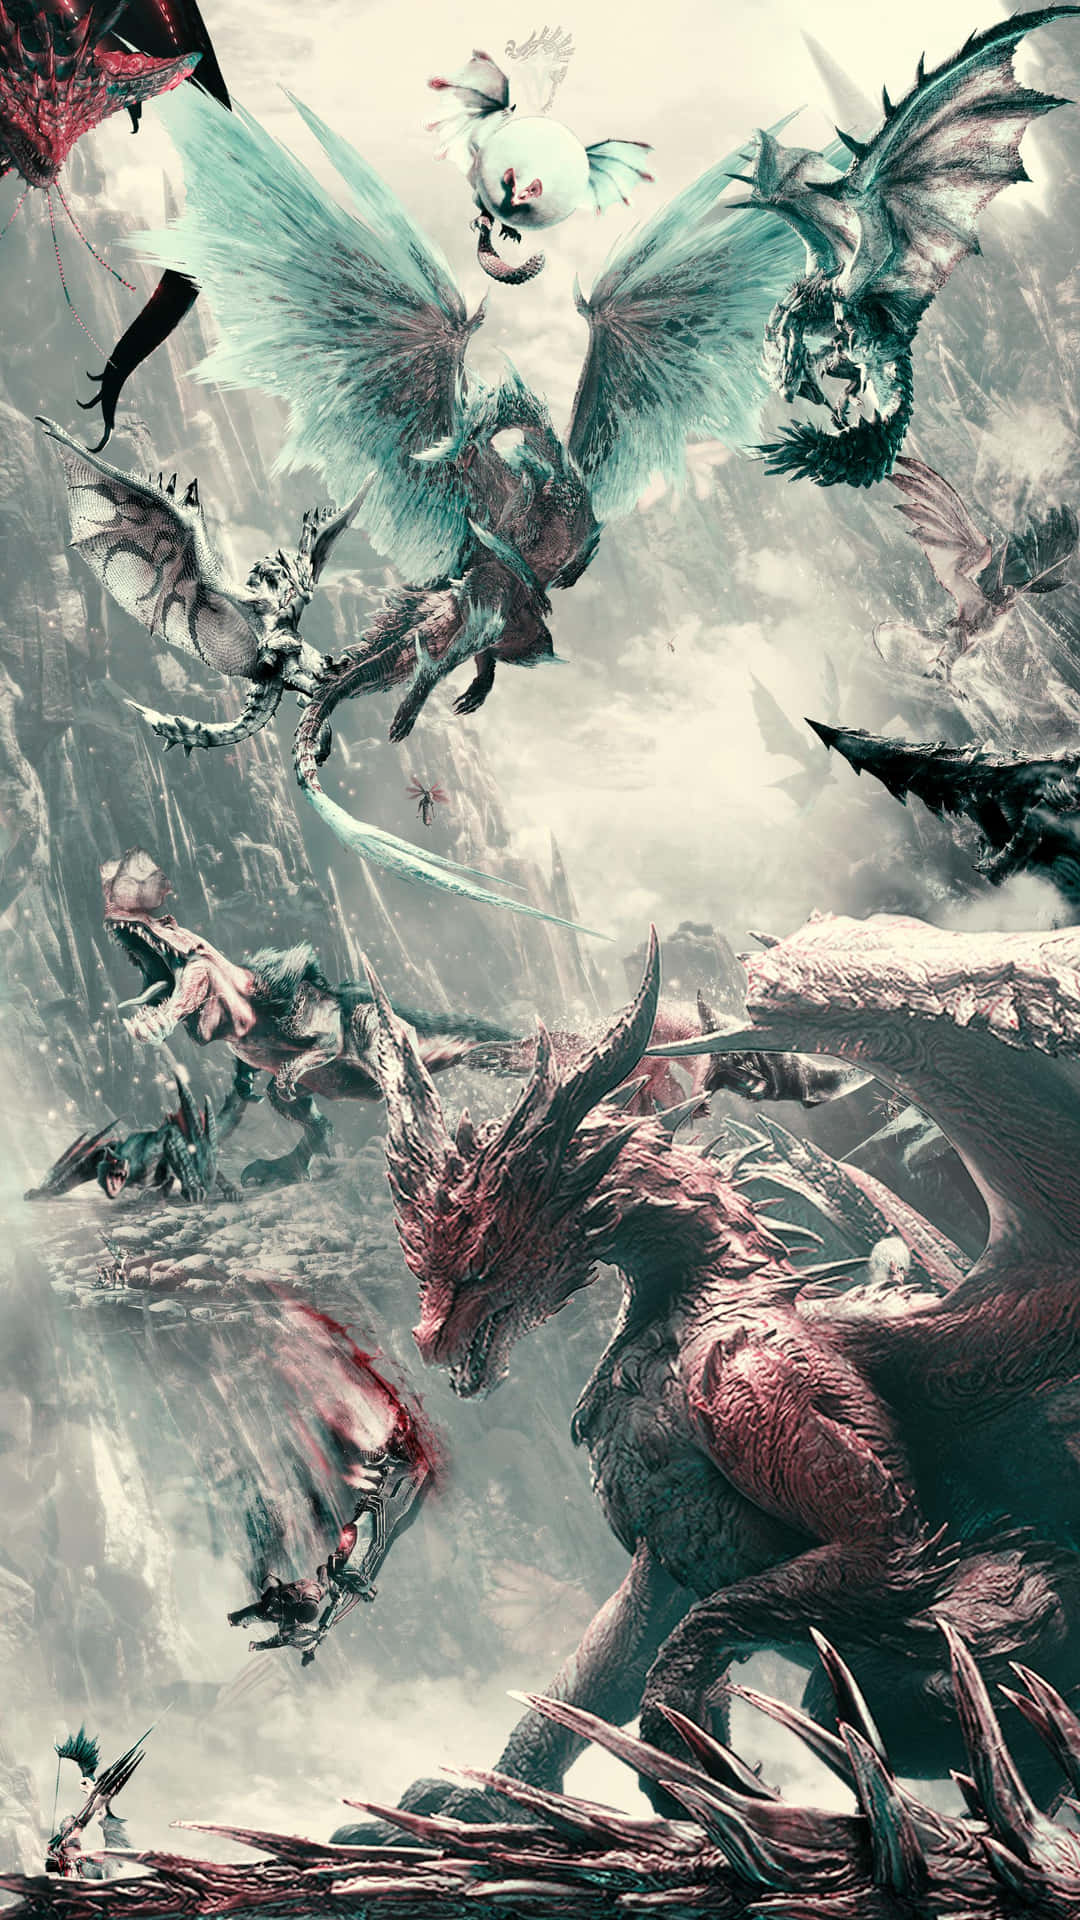 Go on an Epic Adventure with the Monster Hunter 3 Video Game Wallpaper